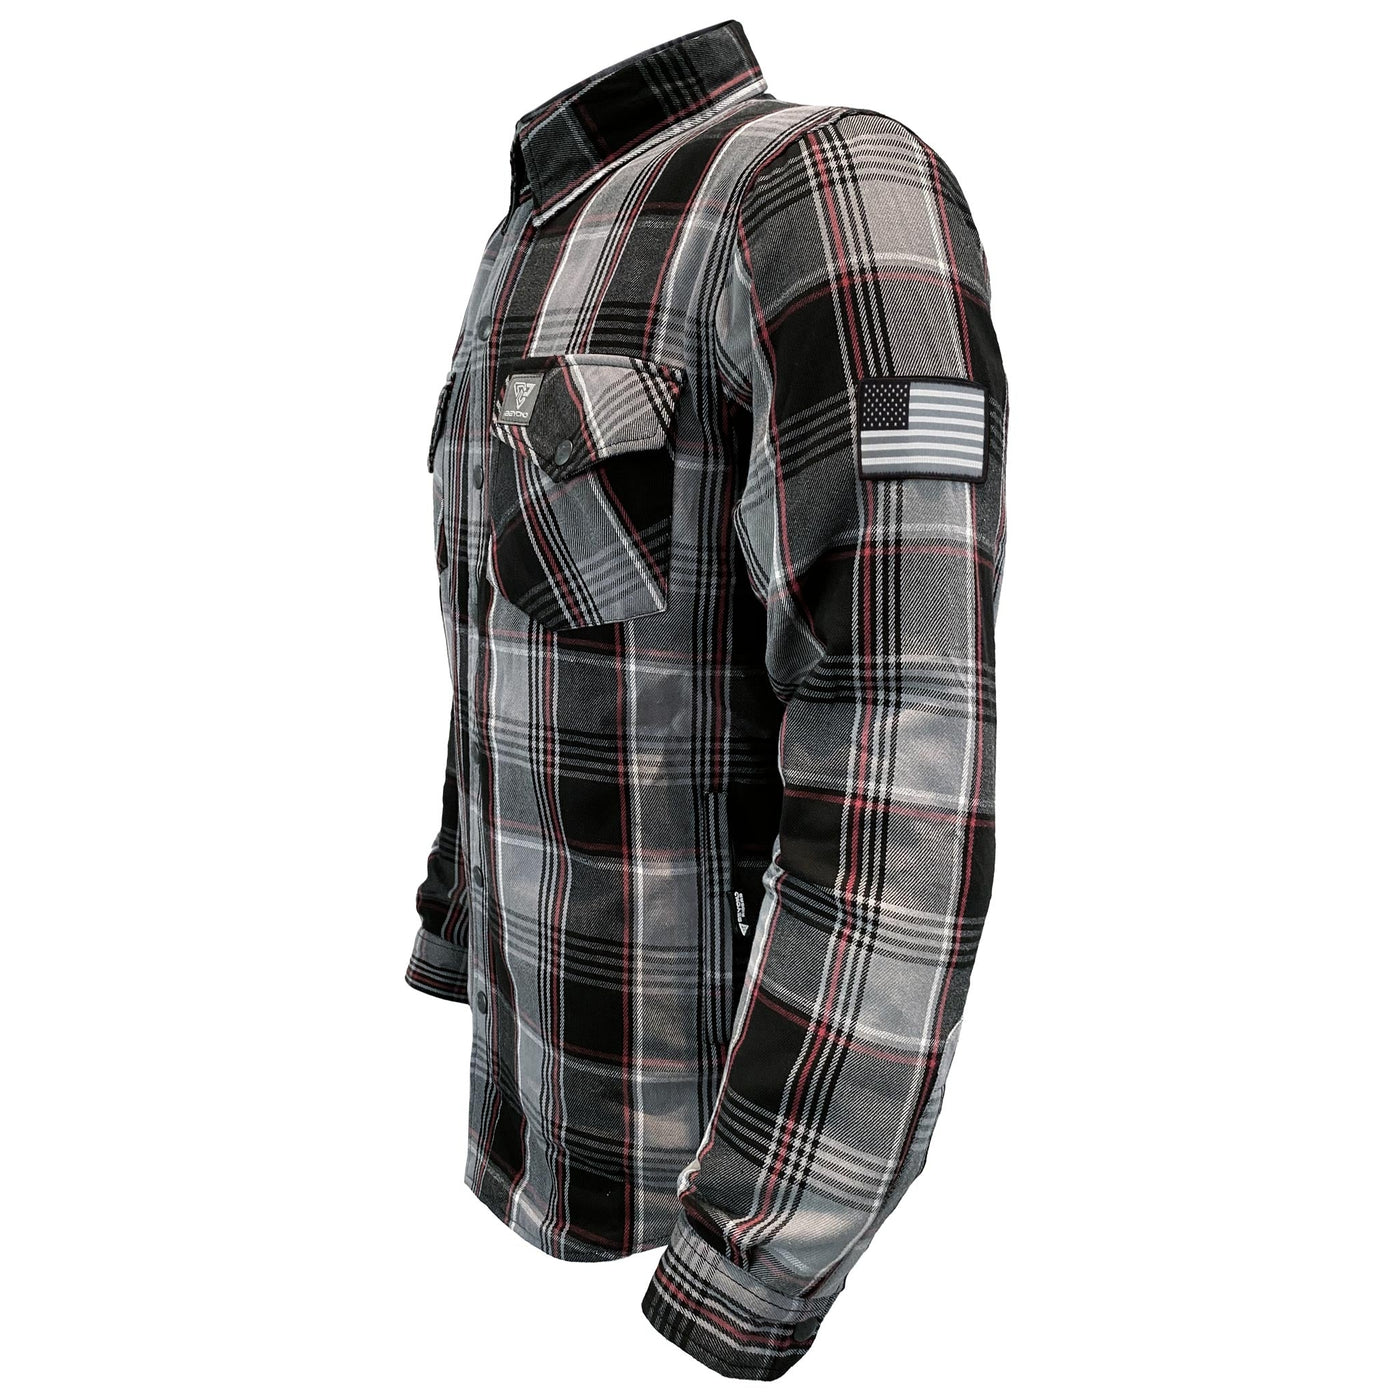 Protective Flannel Shirt For Men with Pads - Grey, Black, Red Checkered